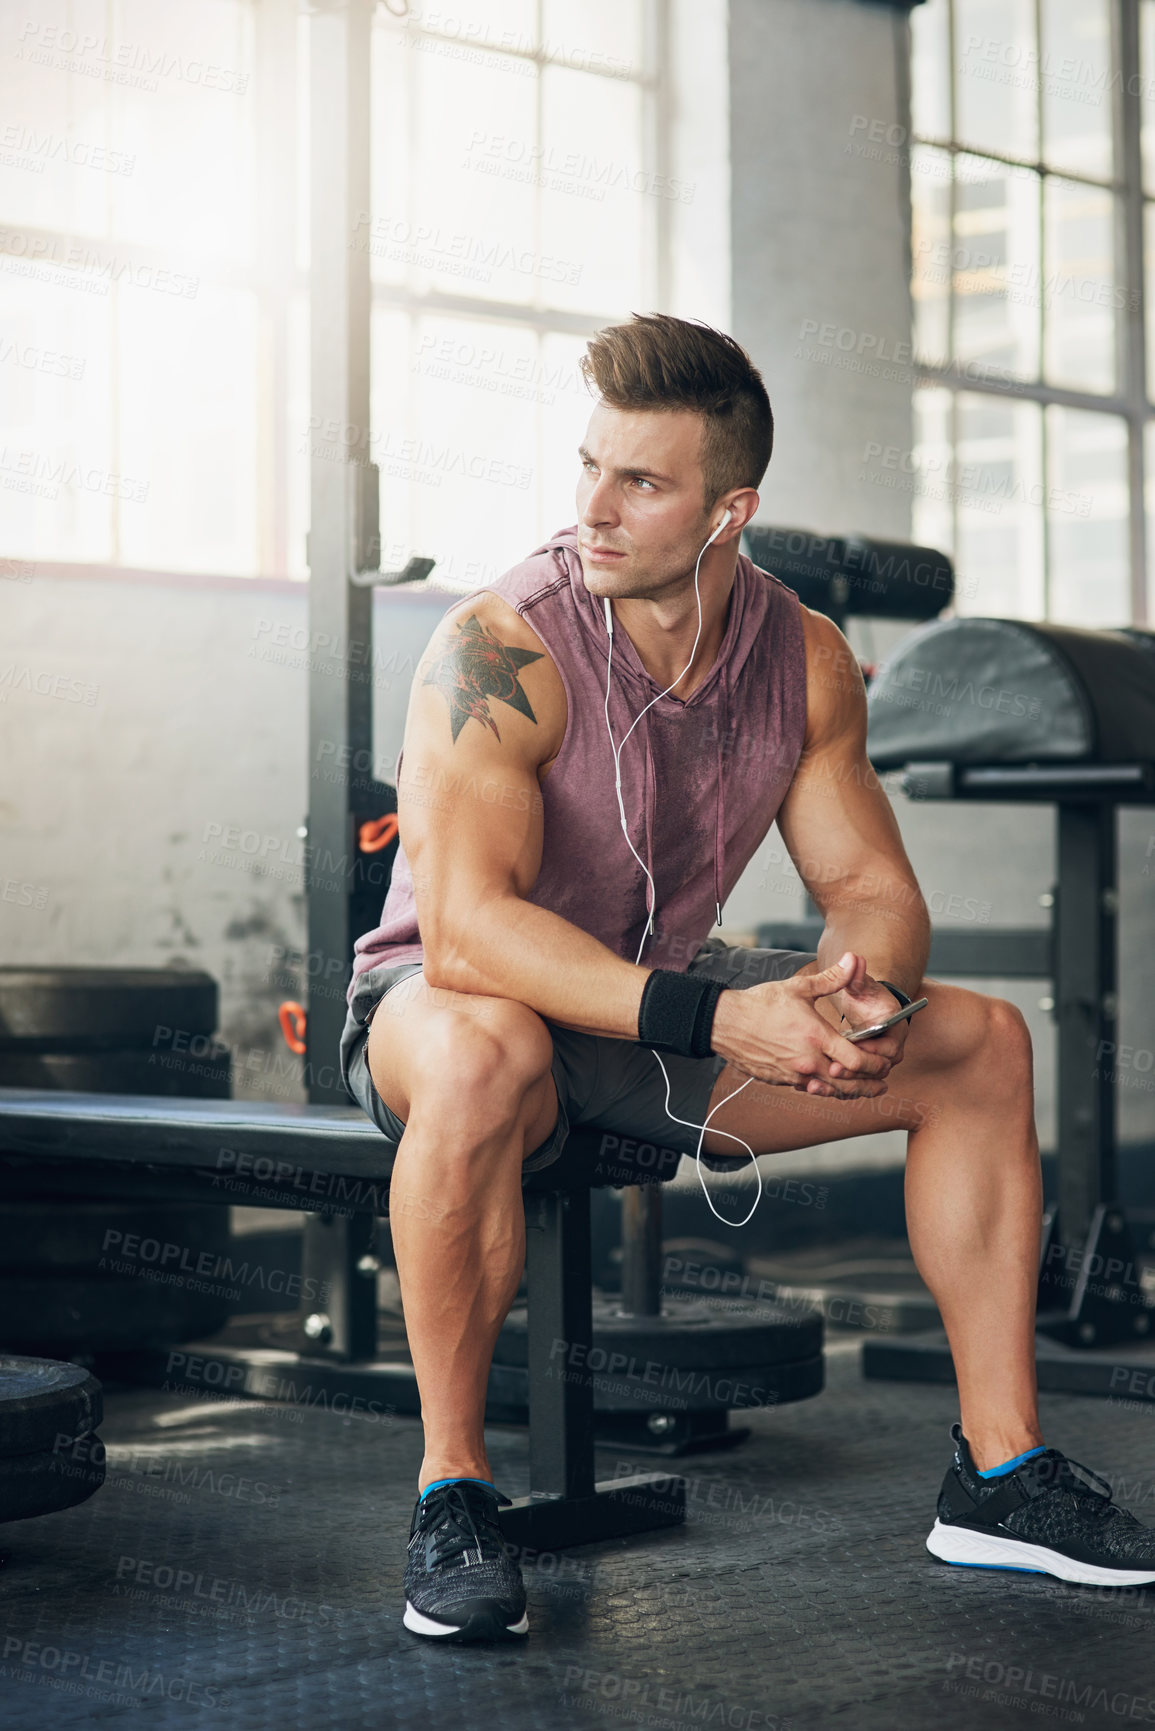 Buy stock photo Shot of a handsome young man at the gym